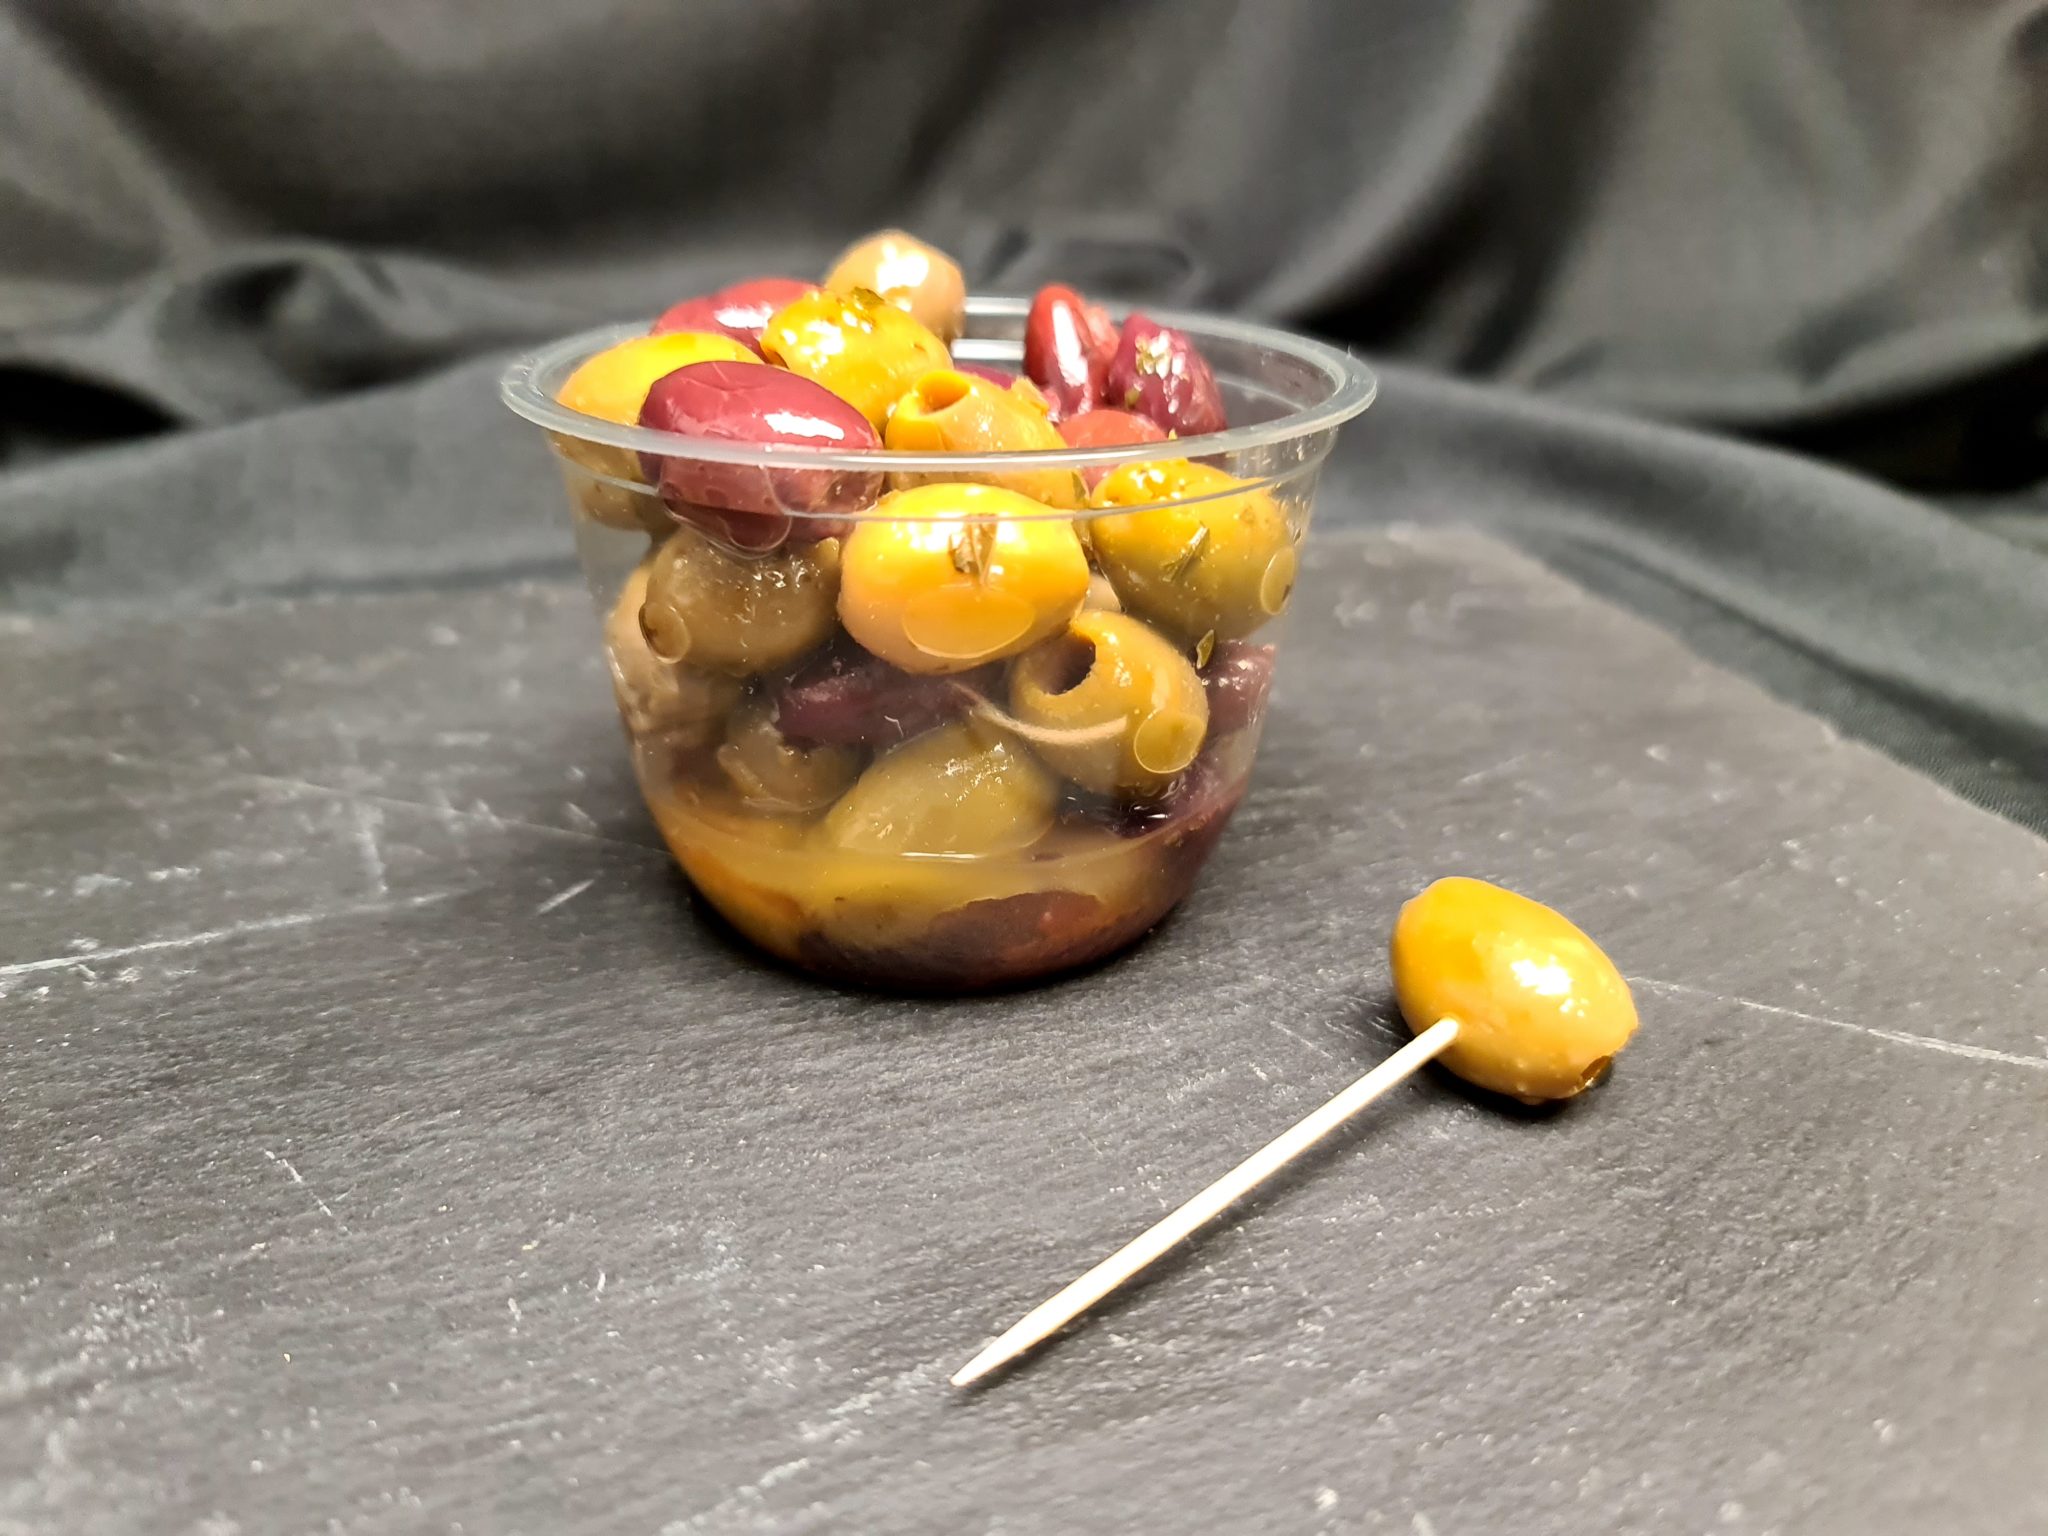 Olives for corporate catering